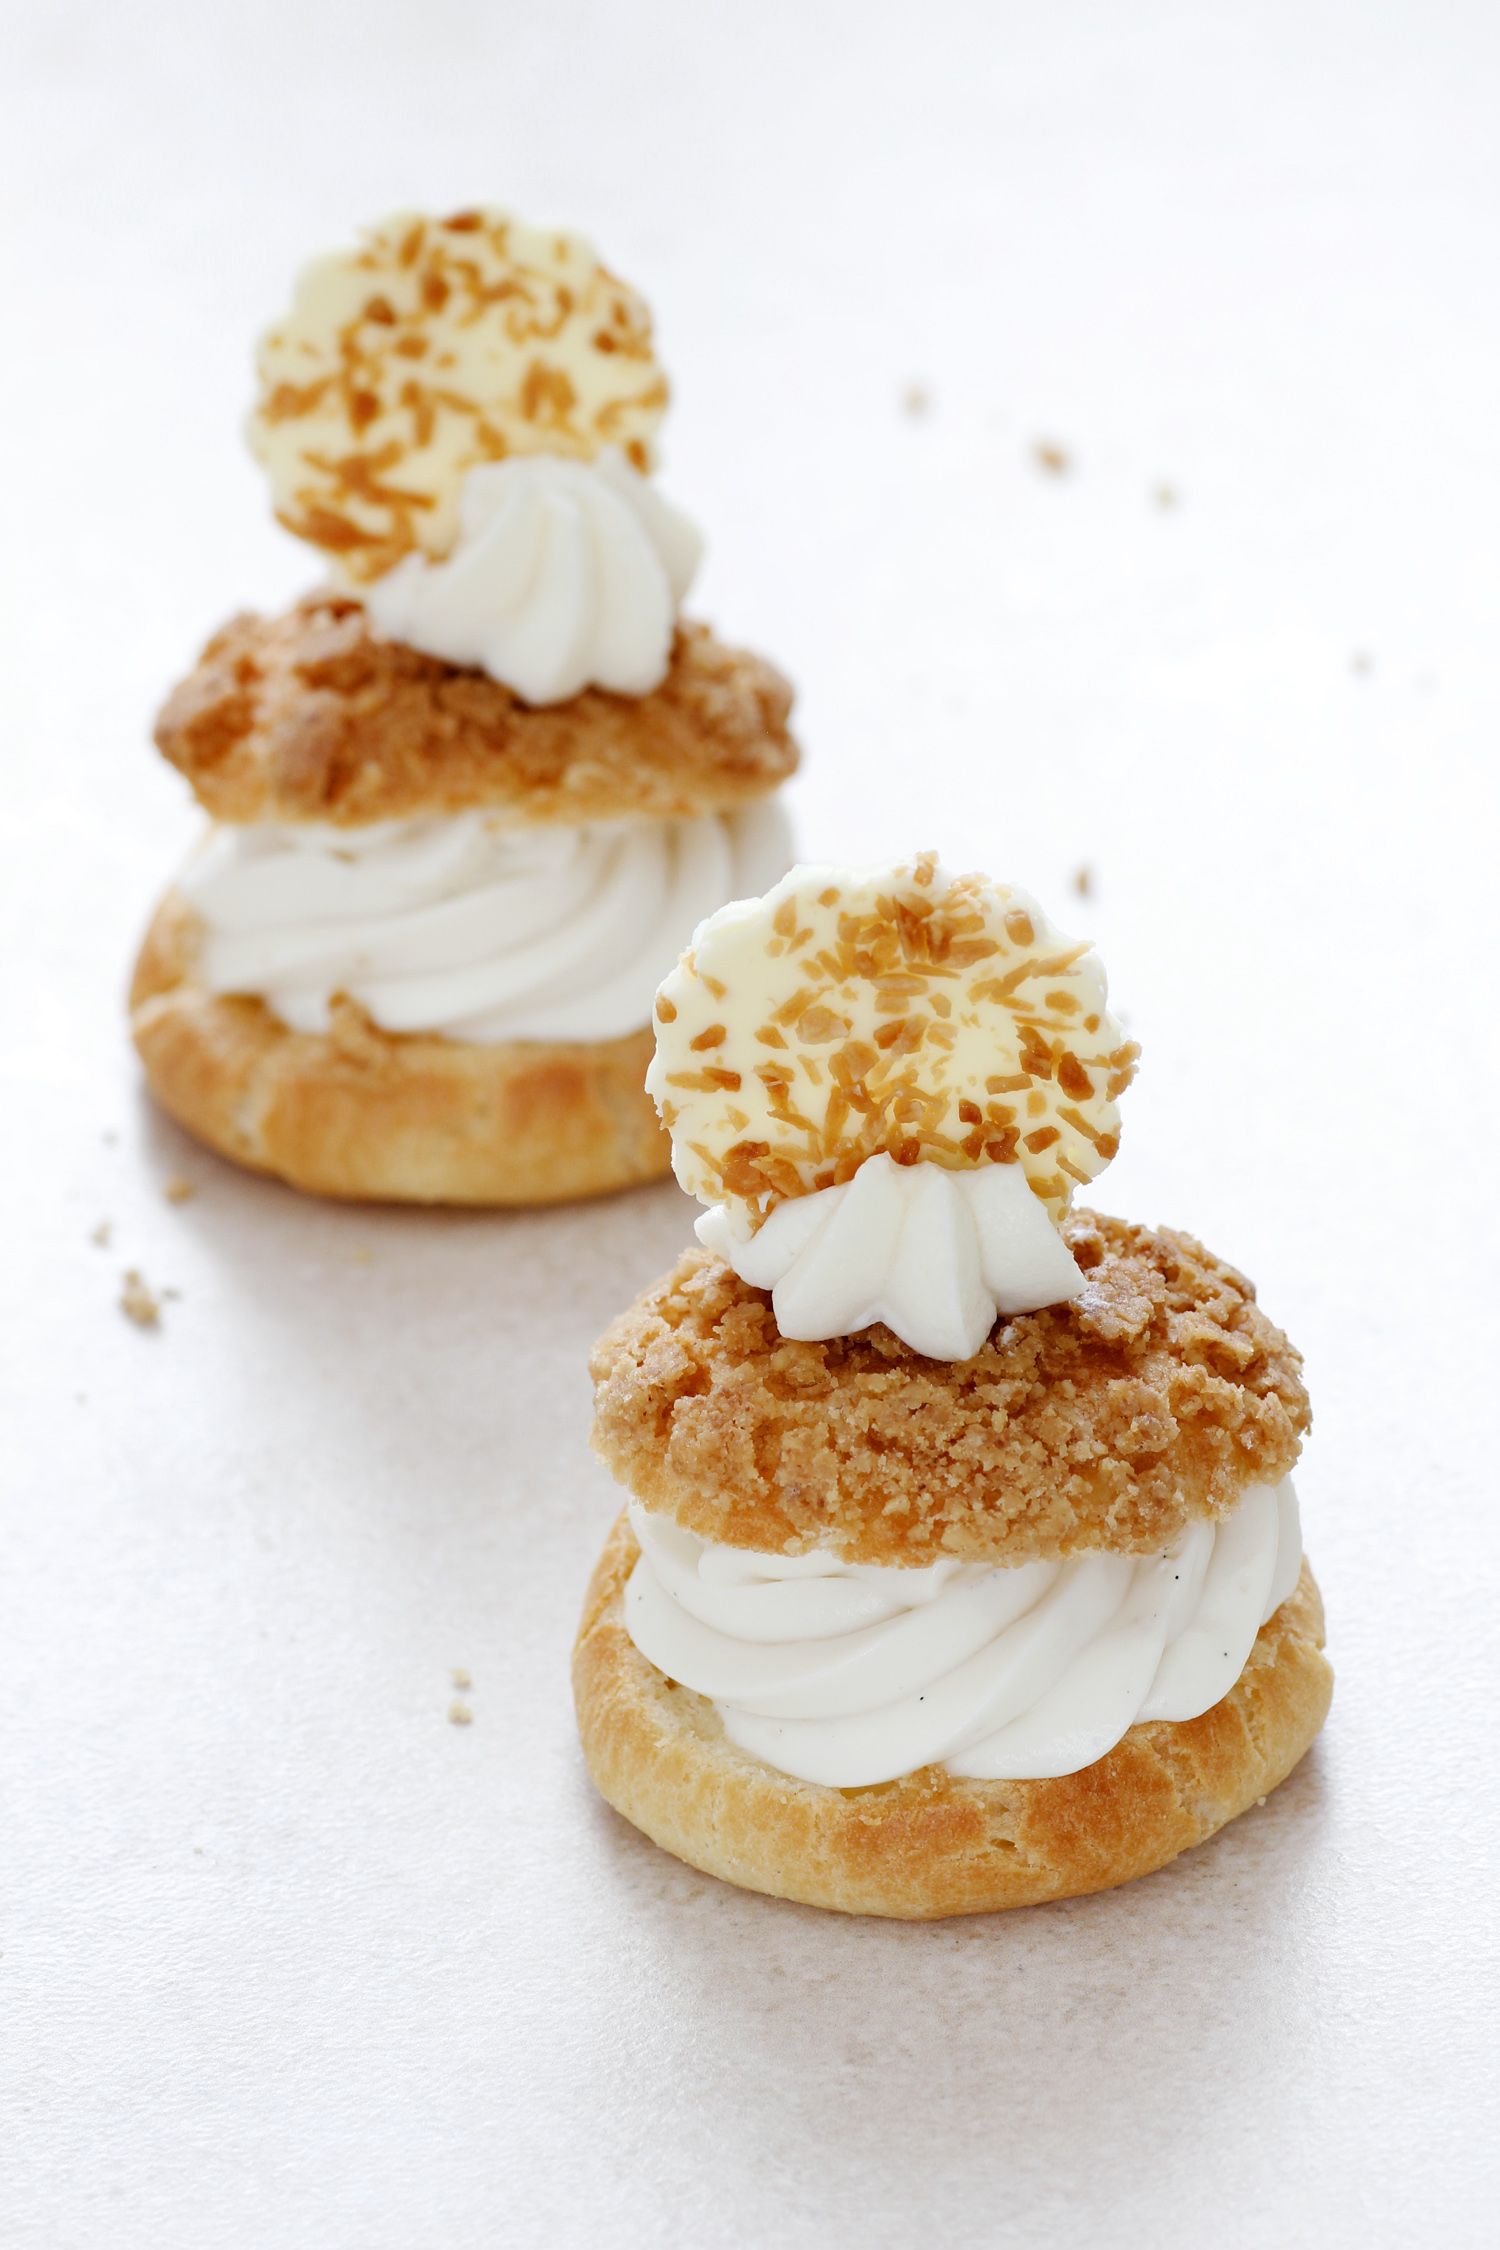 Cream Puffs filled with Honey White Chocolate Mousse and Almond Streusel